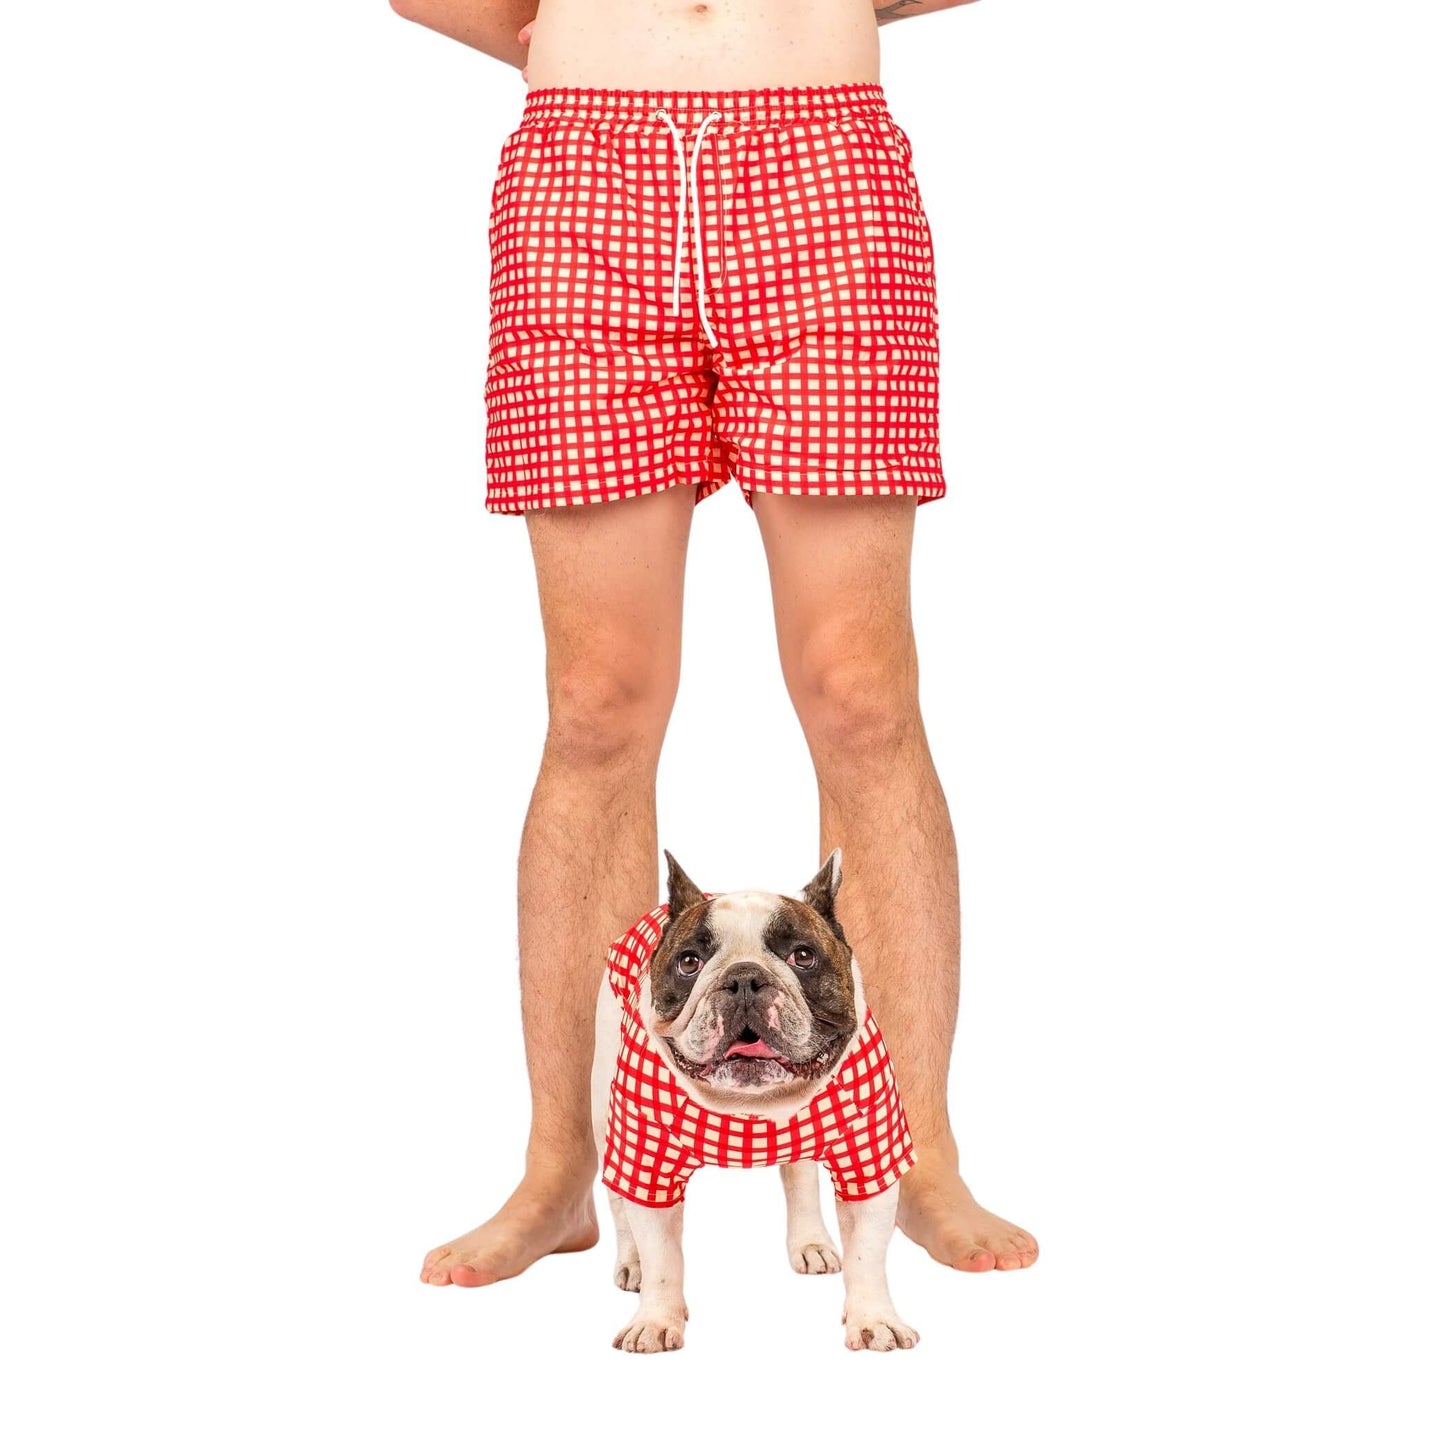 French Bulldog standing front on and Male model wearing matching Vibrant Hound Red Gingham swimwear.